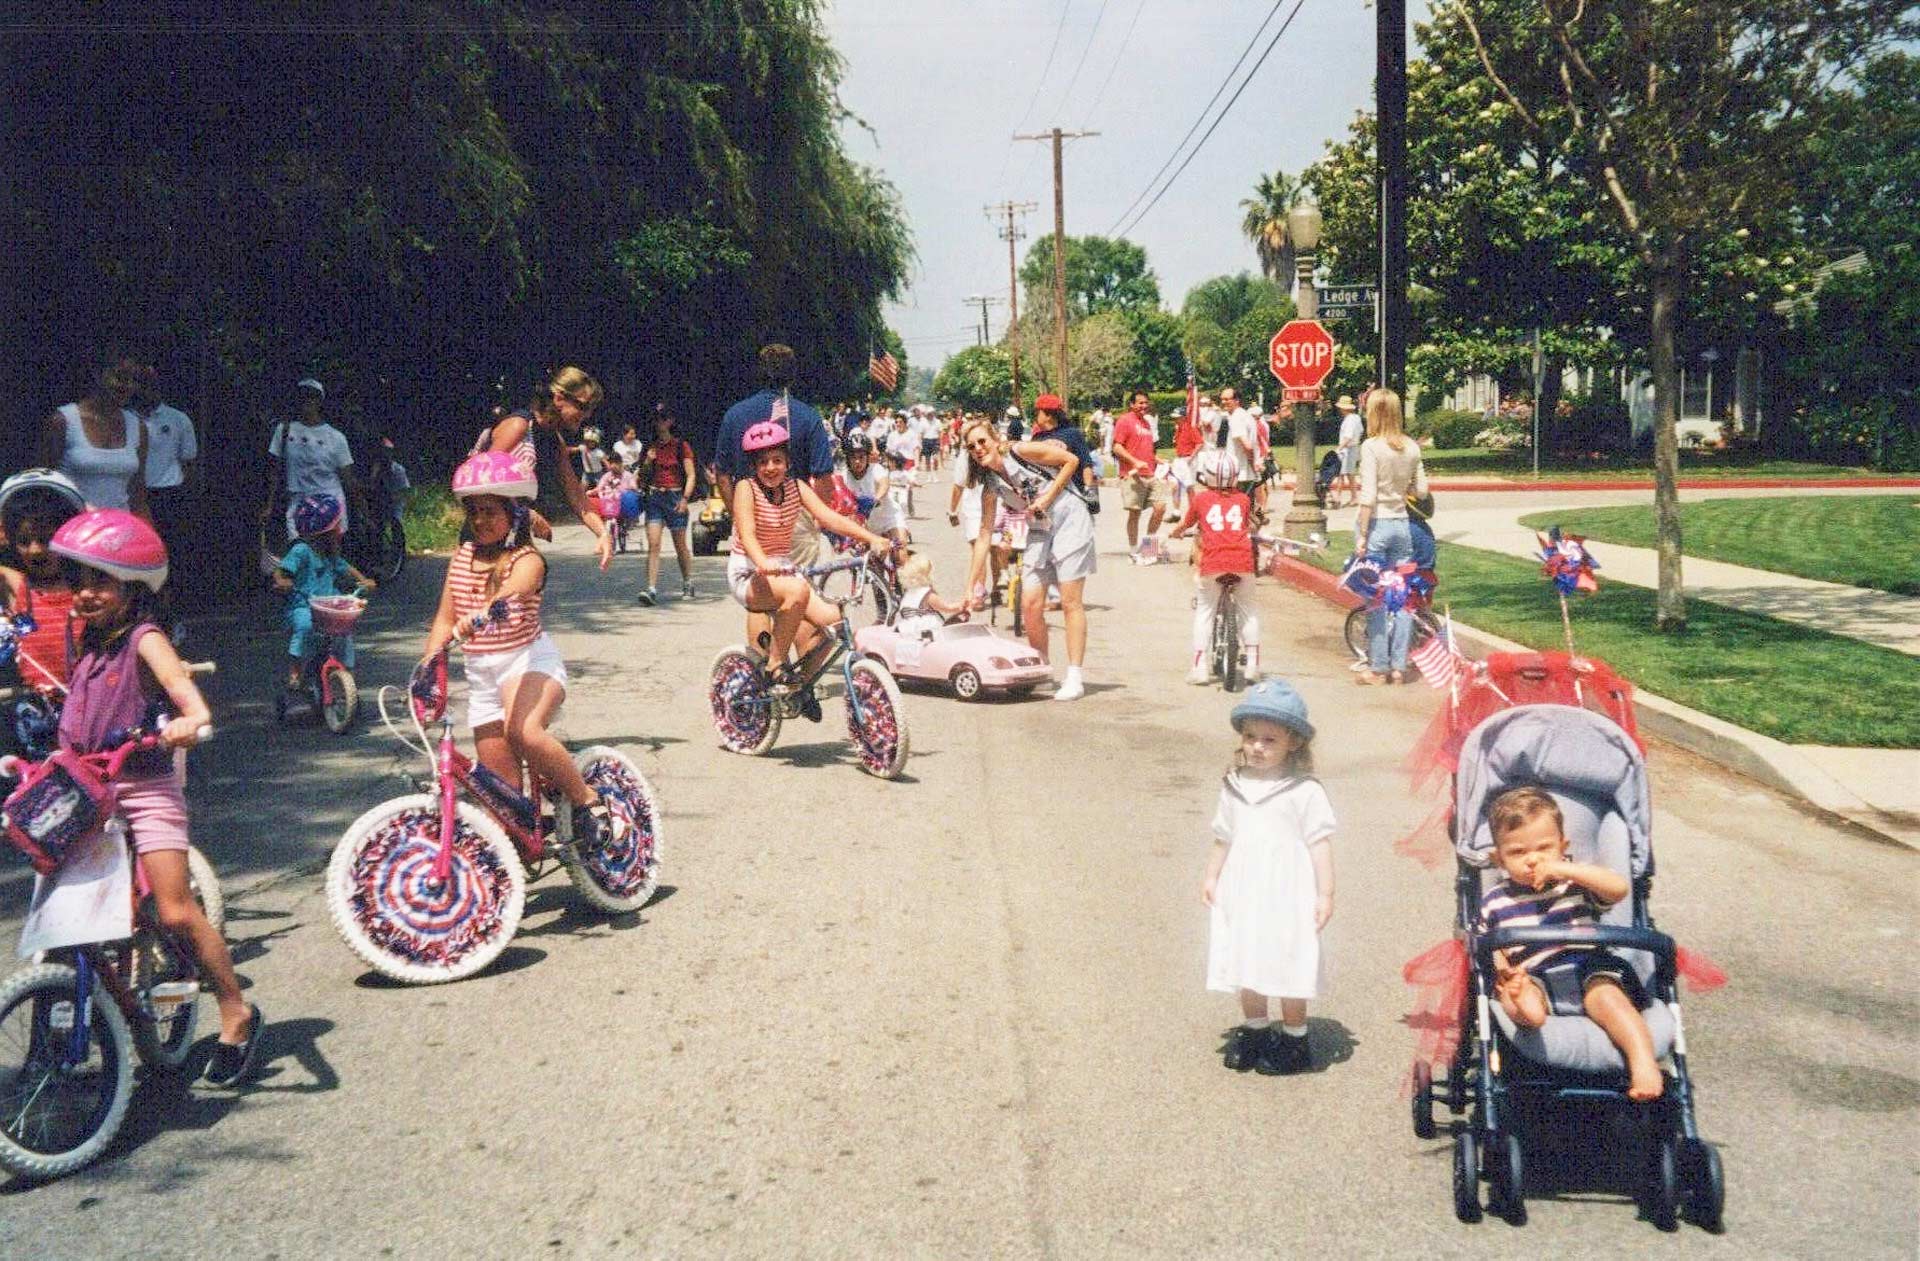 history-from-our-readers-2-toluca-lake-fourth-of-july-parade-1998-1